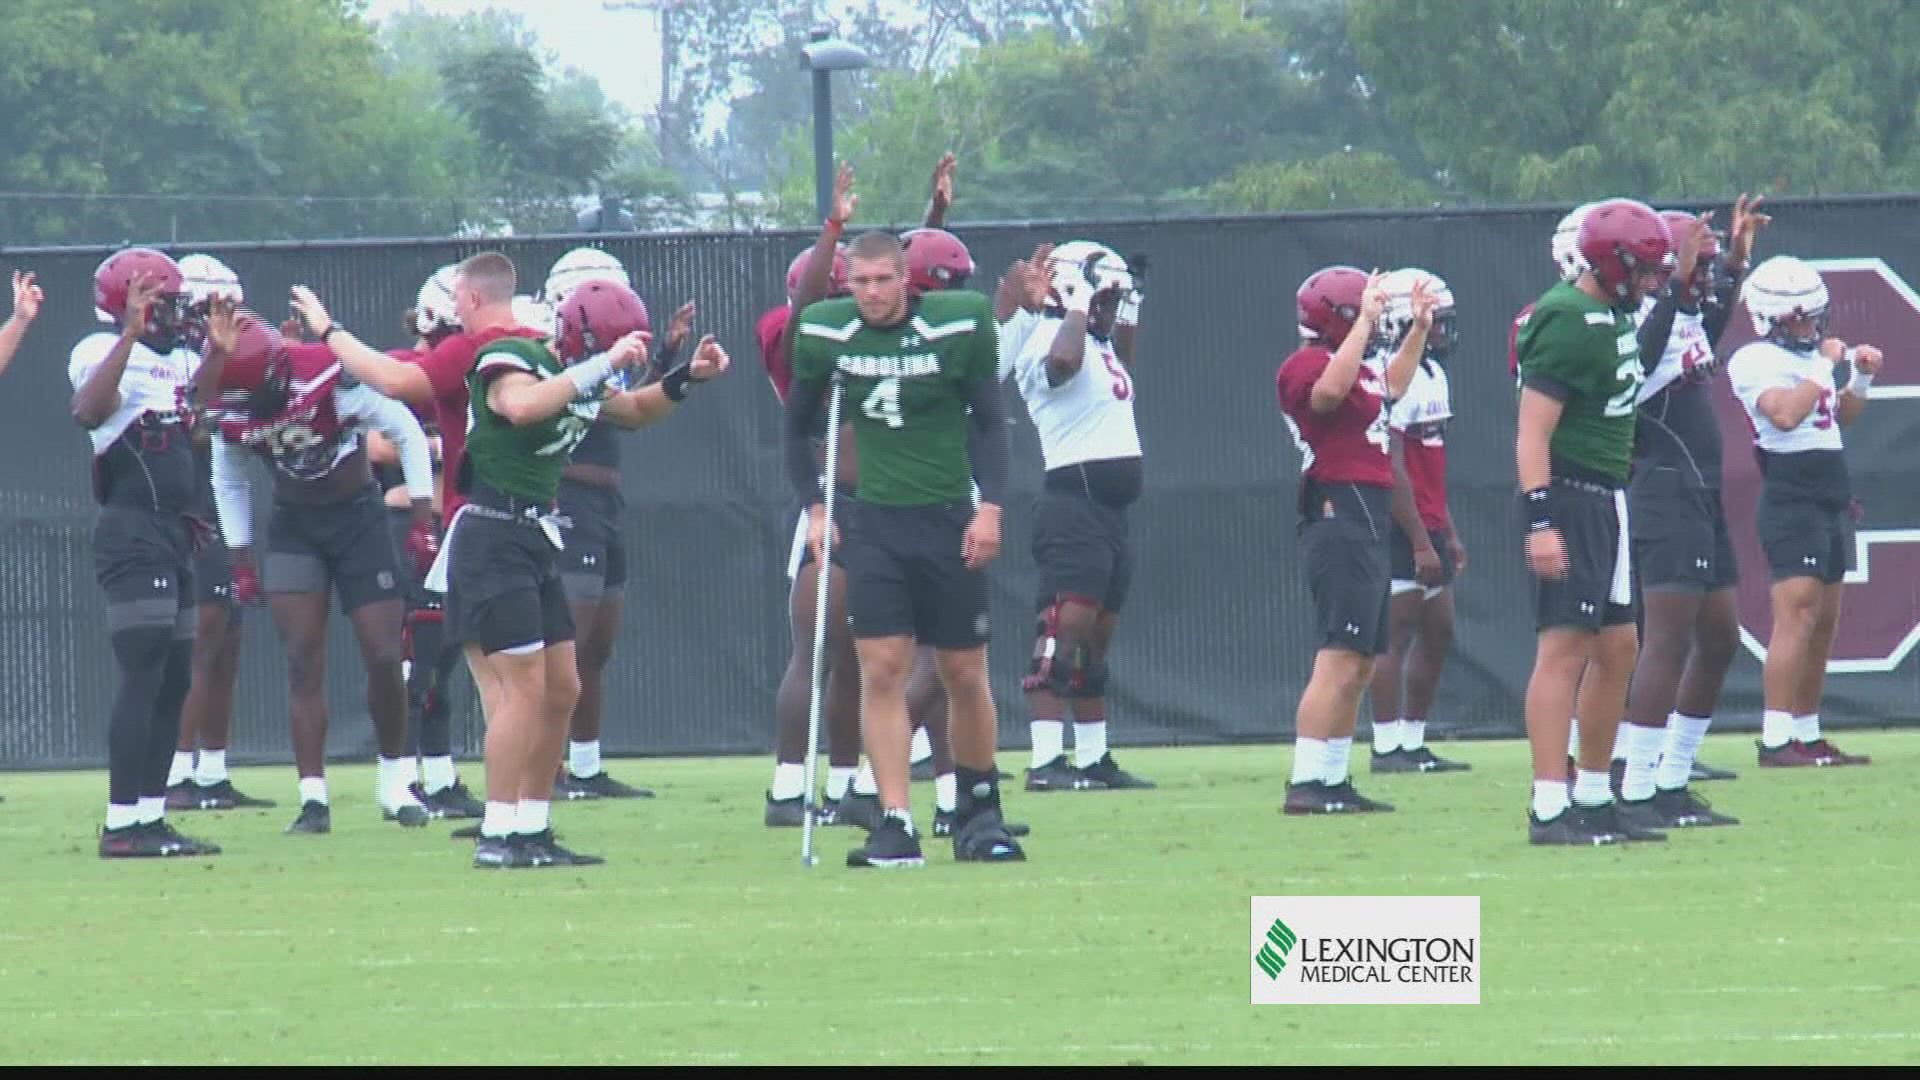 South Carolina offensive coordinator Marcus Satterfield talks about how the quarterback battle is shaping up as Luke Doty continues to recover.